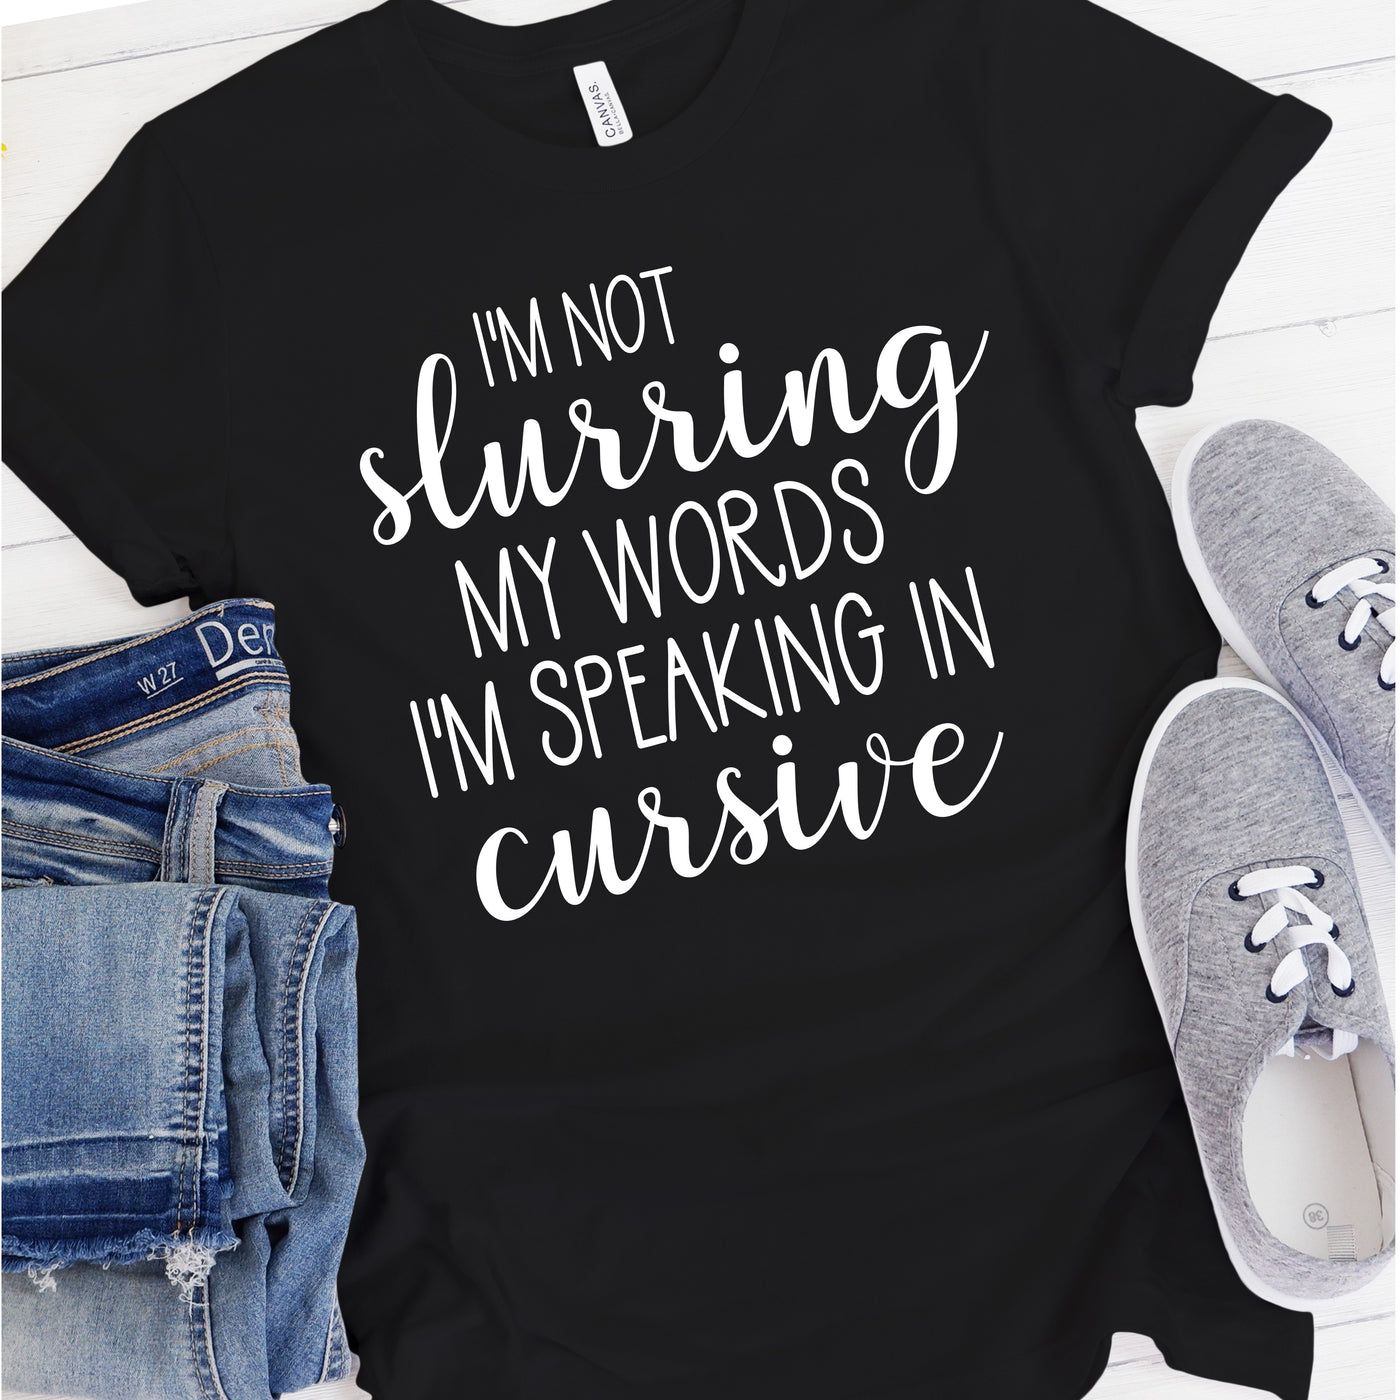 I'm Not Slurring My Words I'm Speaking in Cursive | Funny Drinking Shirts